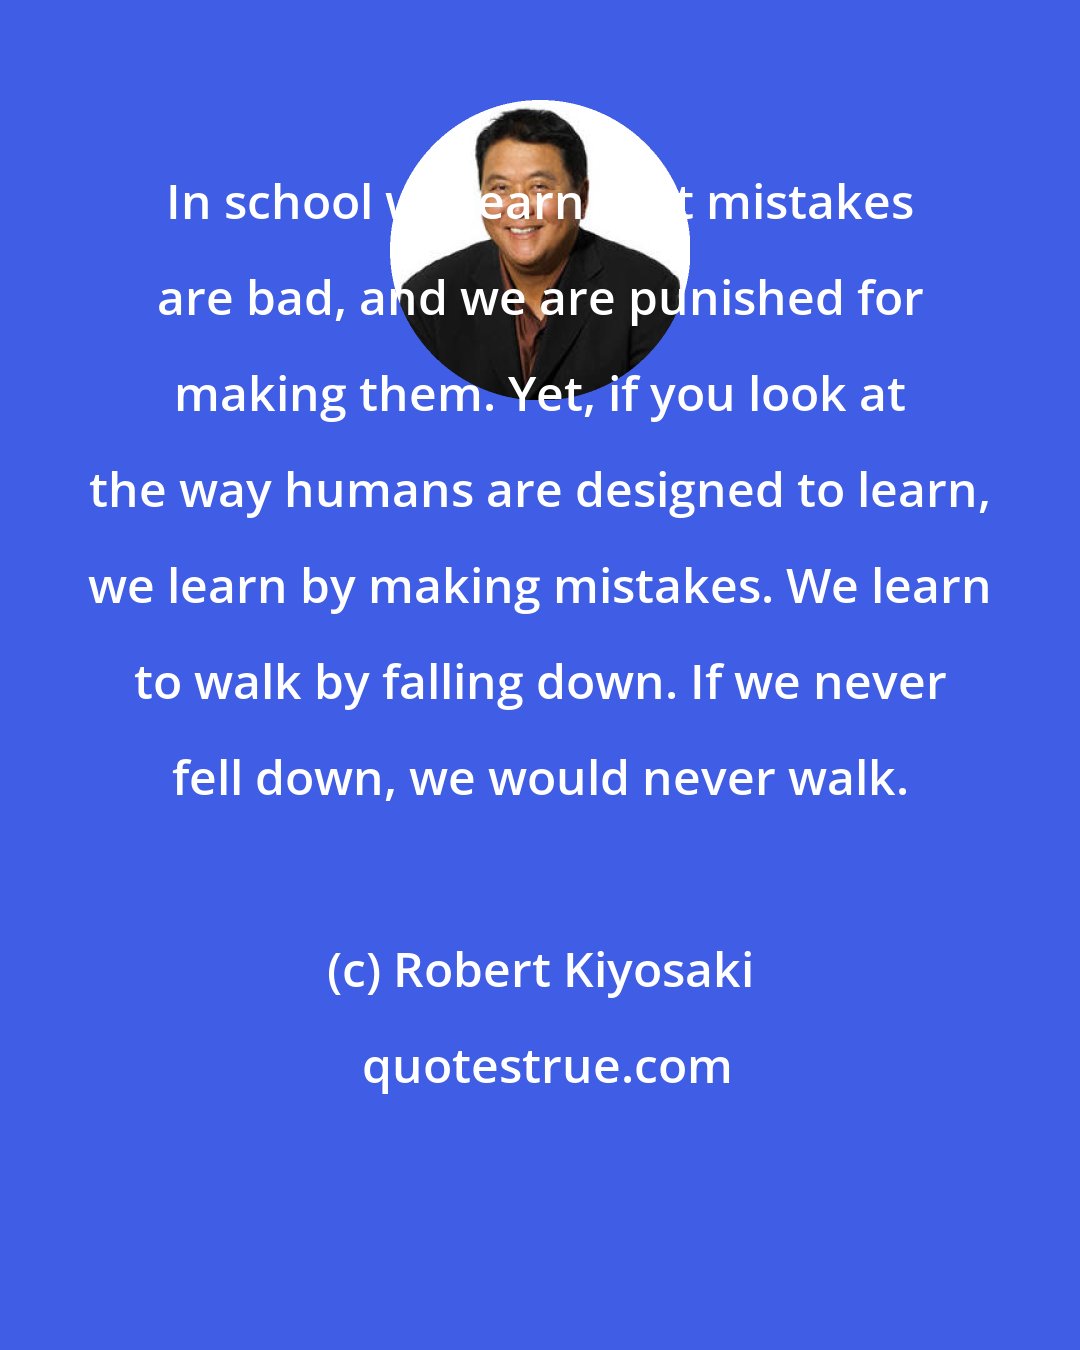 Robert Kiyosaki: In school we learn that mistakes are bad, and we are punished for making them. Yet, if you look at the way humans are designed to learn, we learn by making mistakes. We learn to walk by falling down. If we never fell down, we would never walk.